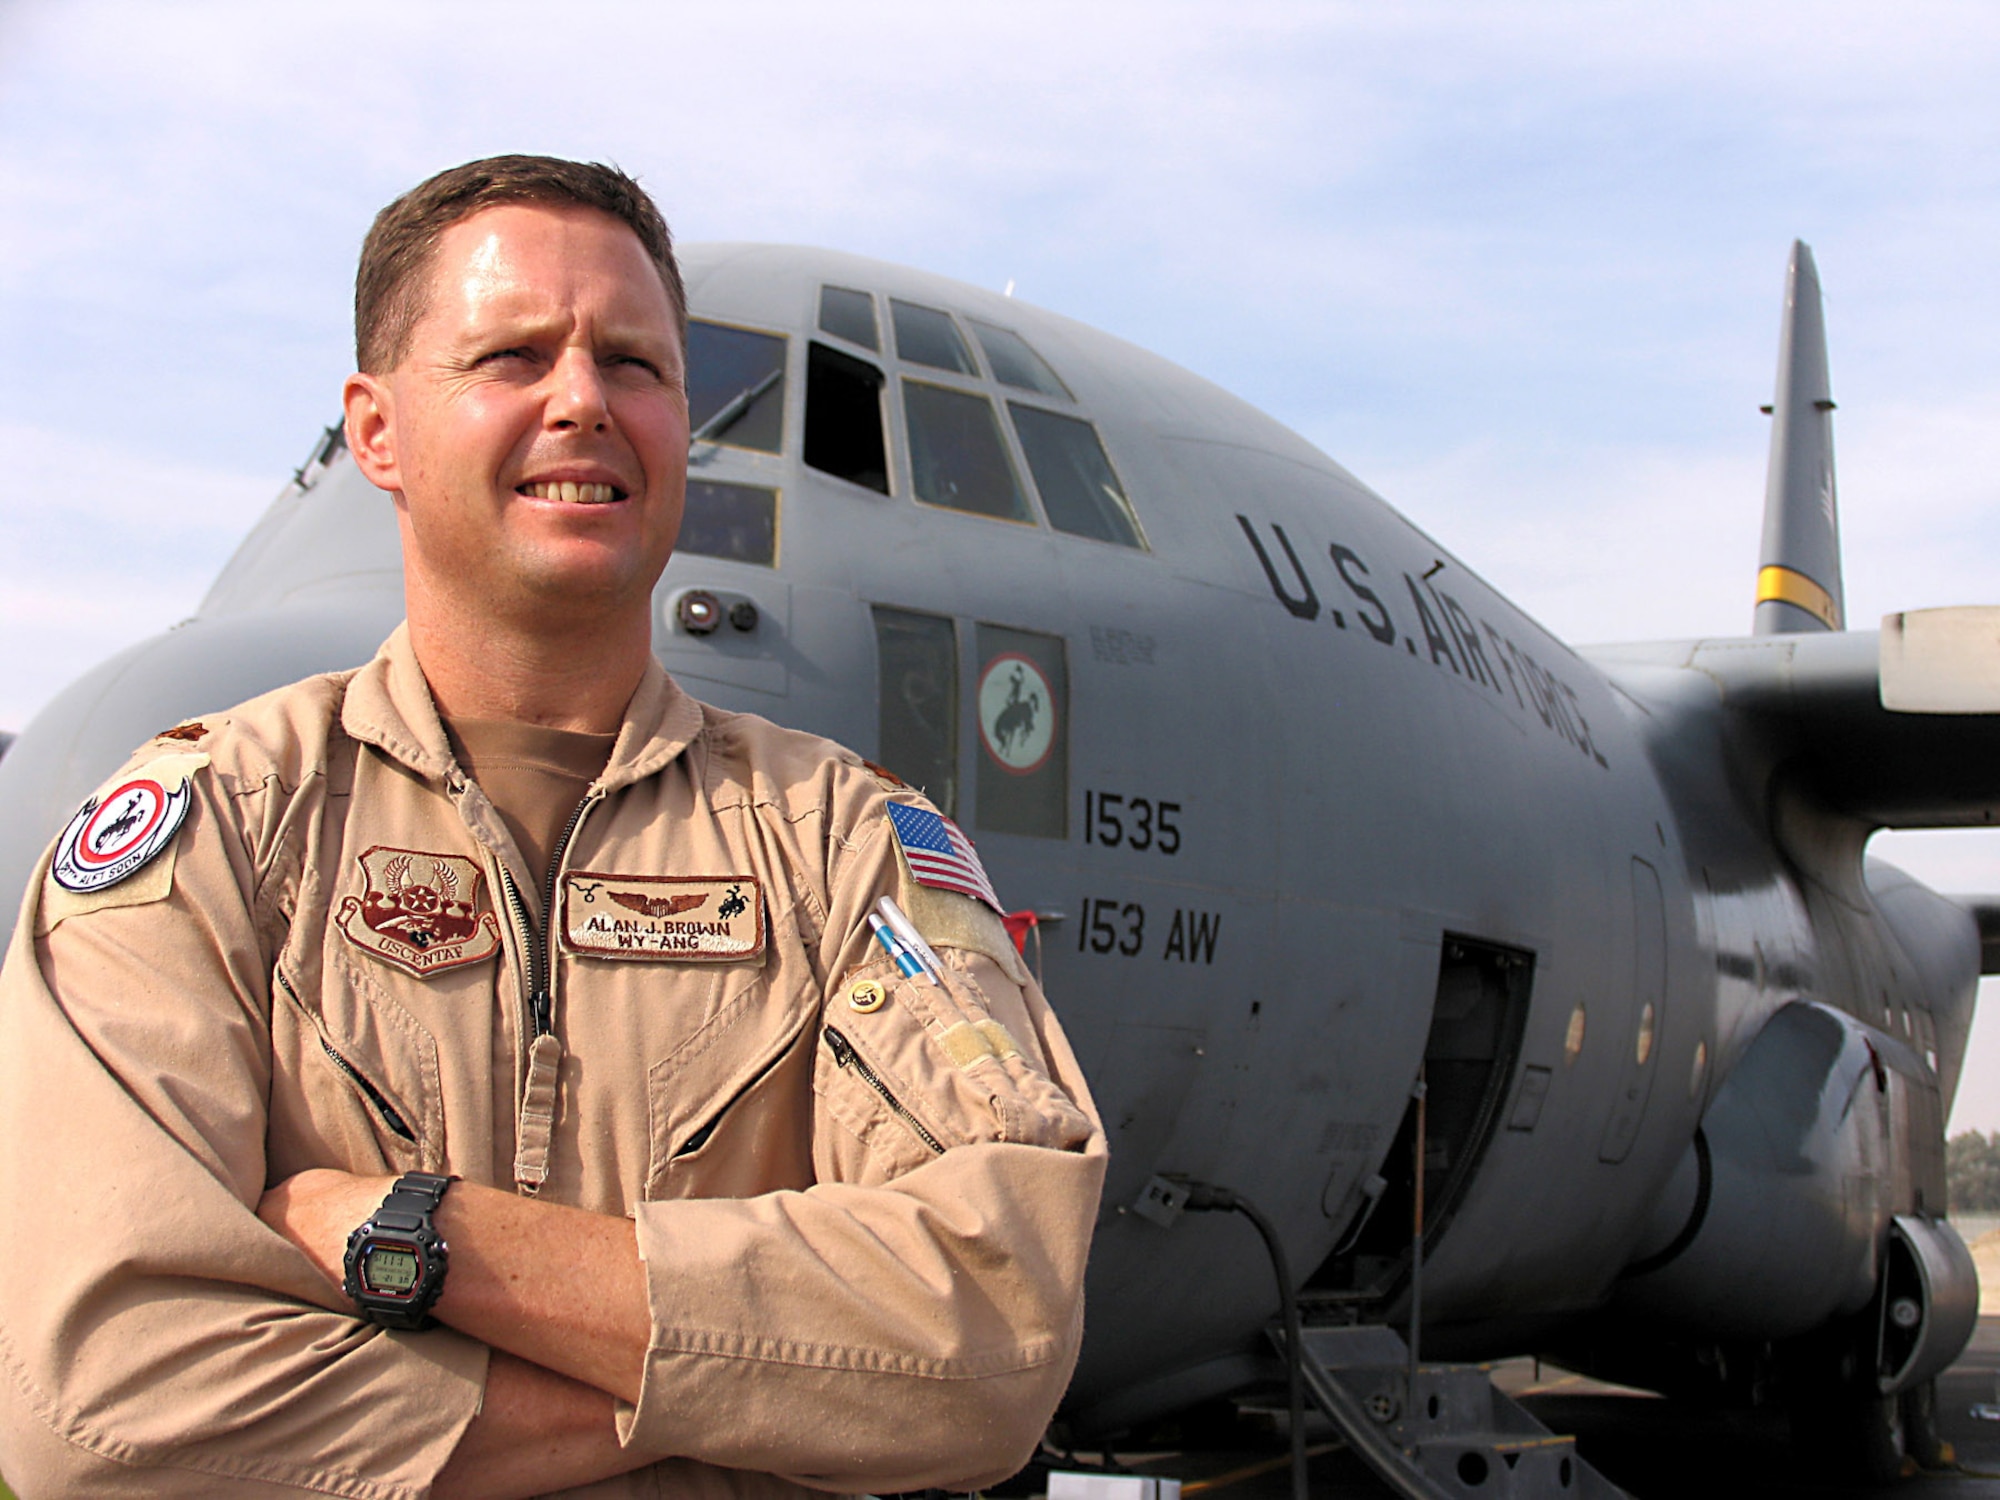 SOUTHWEST ASIA (AFPN) -- Maj. Alan Brown is scheduled to attend pilot re-qualification training. He lost his leg more than seven years ago during a hunting accident. (U.S. Air Force photo by Tech. Sgt. Mark Getsy)
